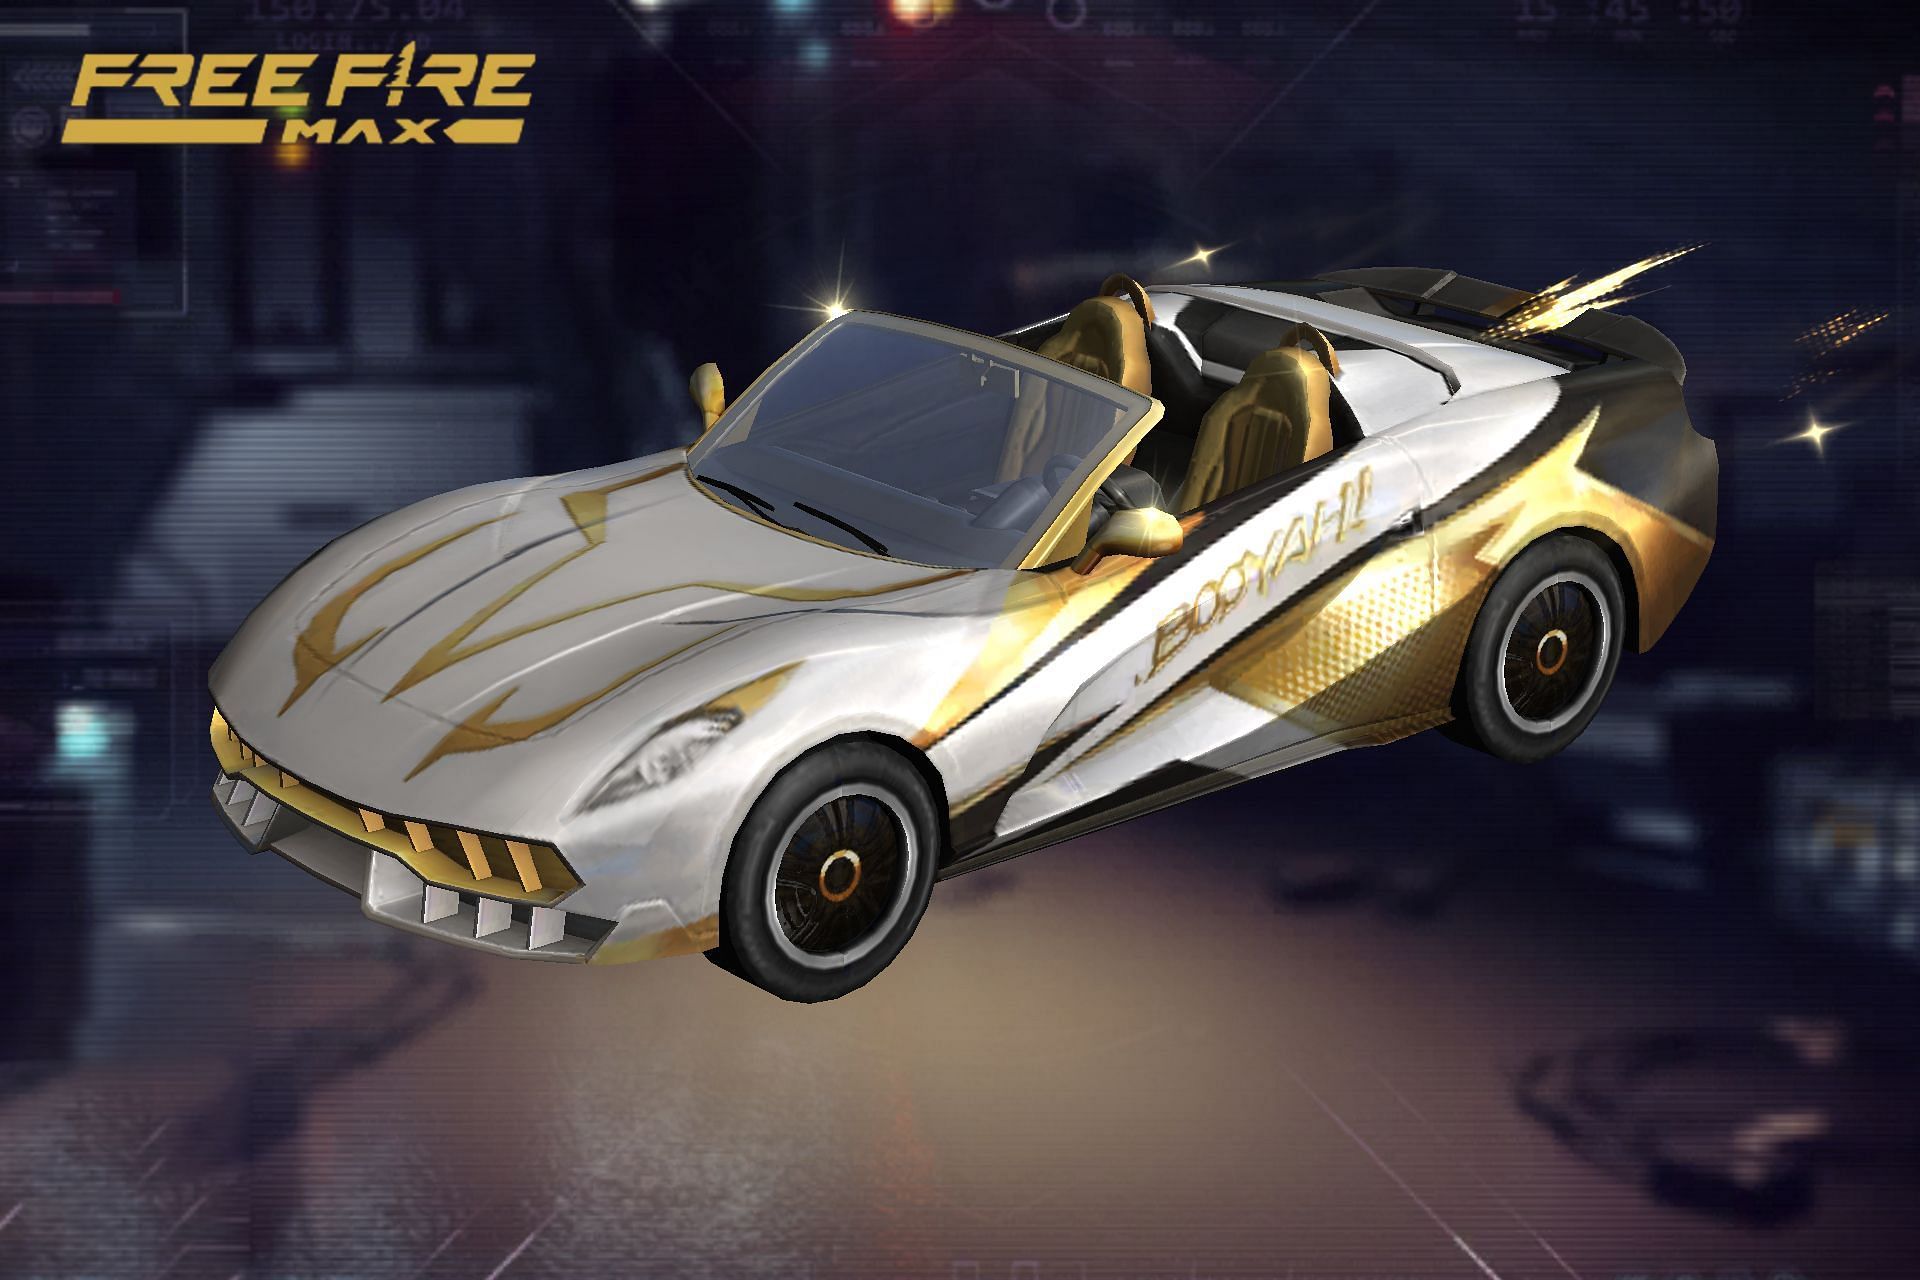 New event has been added to Free Fire MAX (Image via Garena)